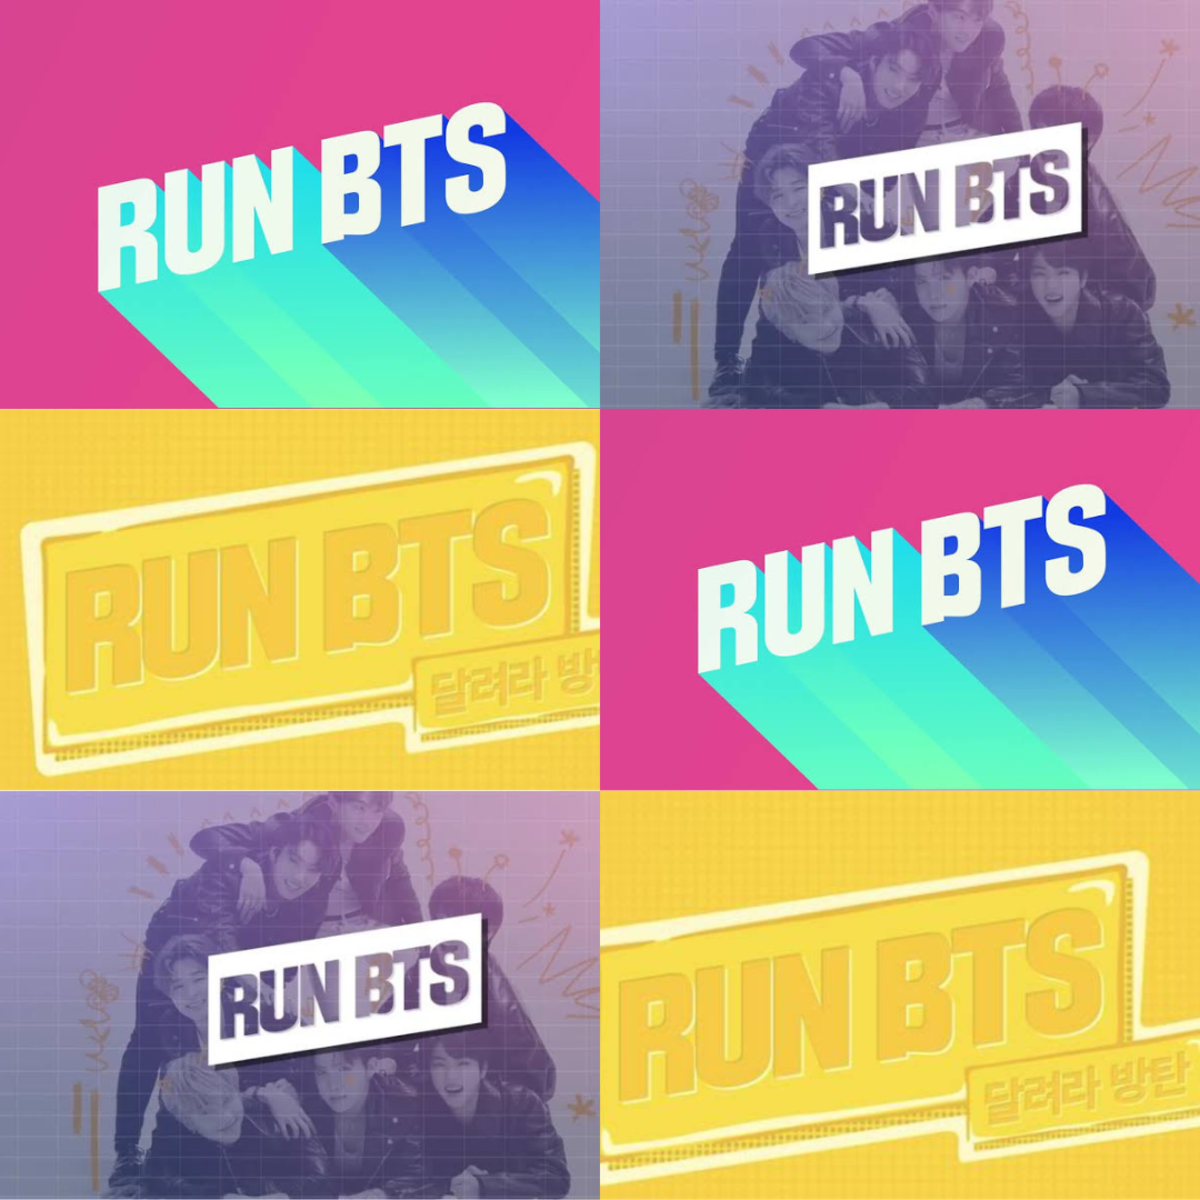 run-bts-role-playing-episodes